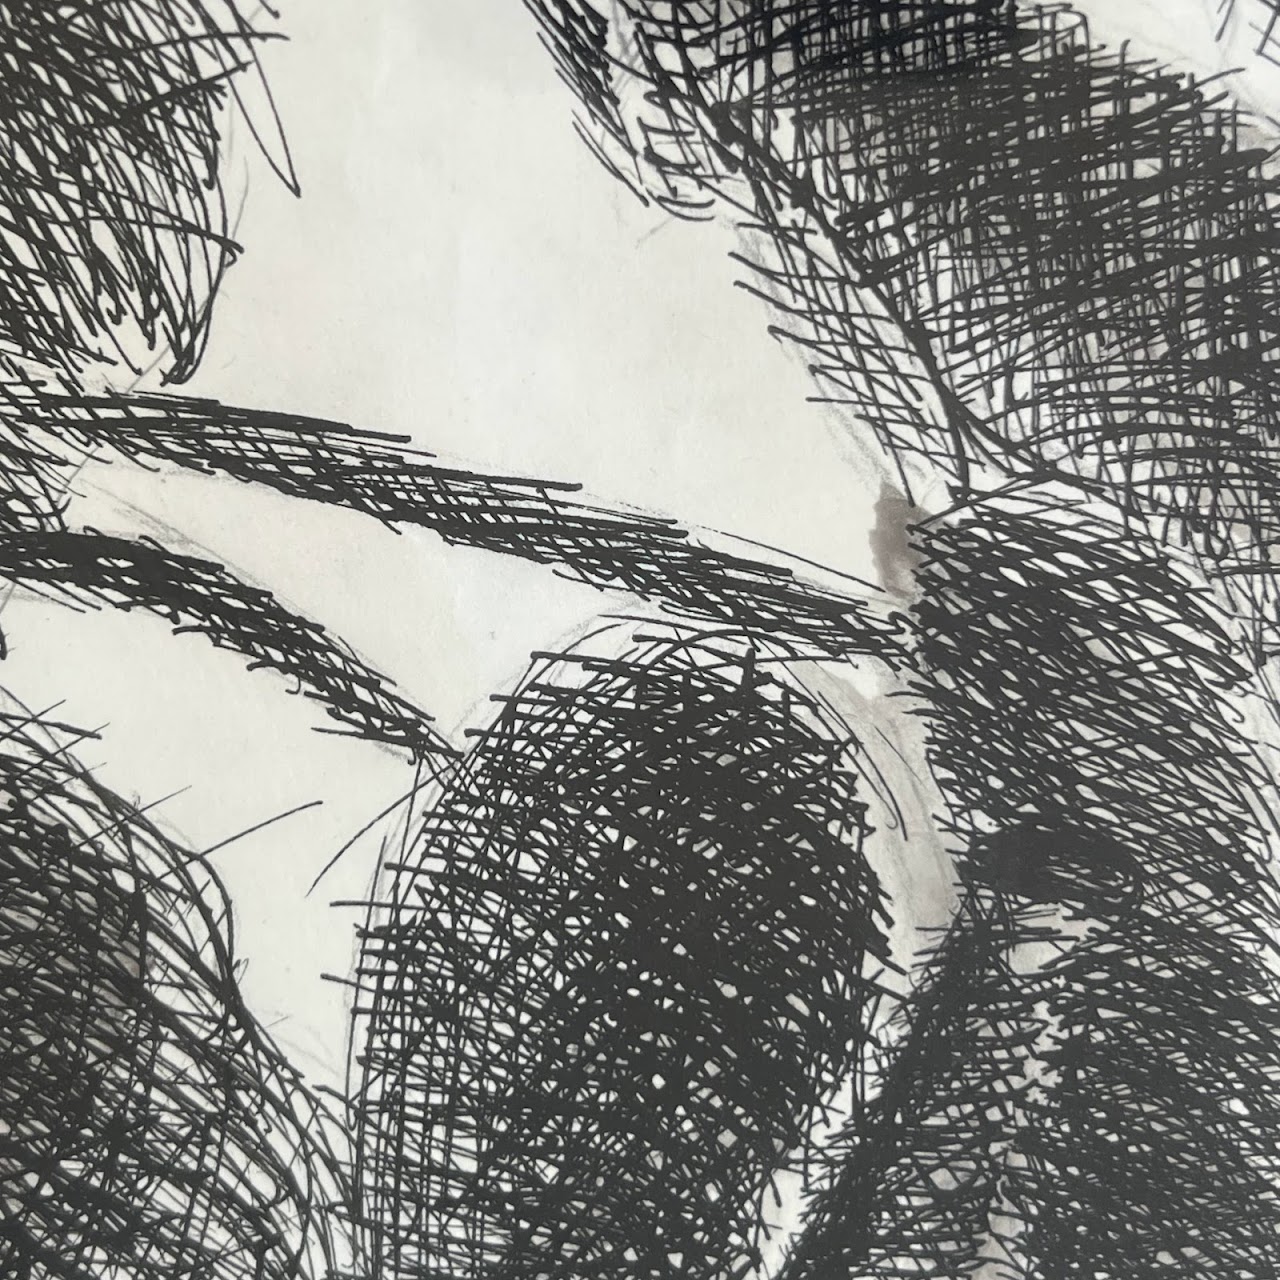 Emily Stern Signed Ink Drawing, 1977